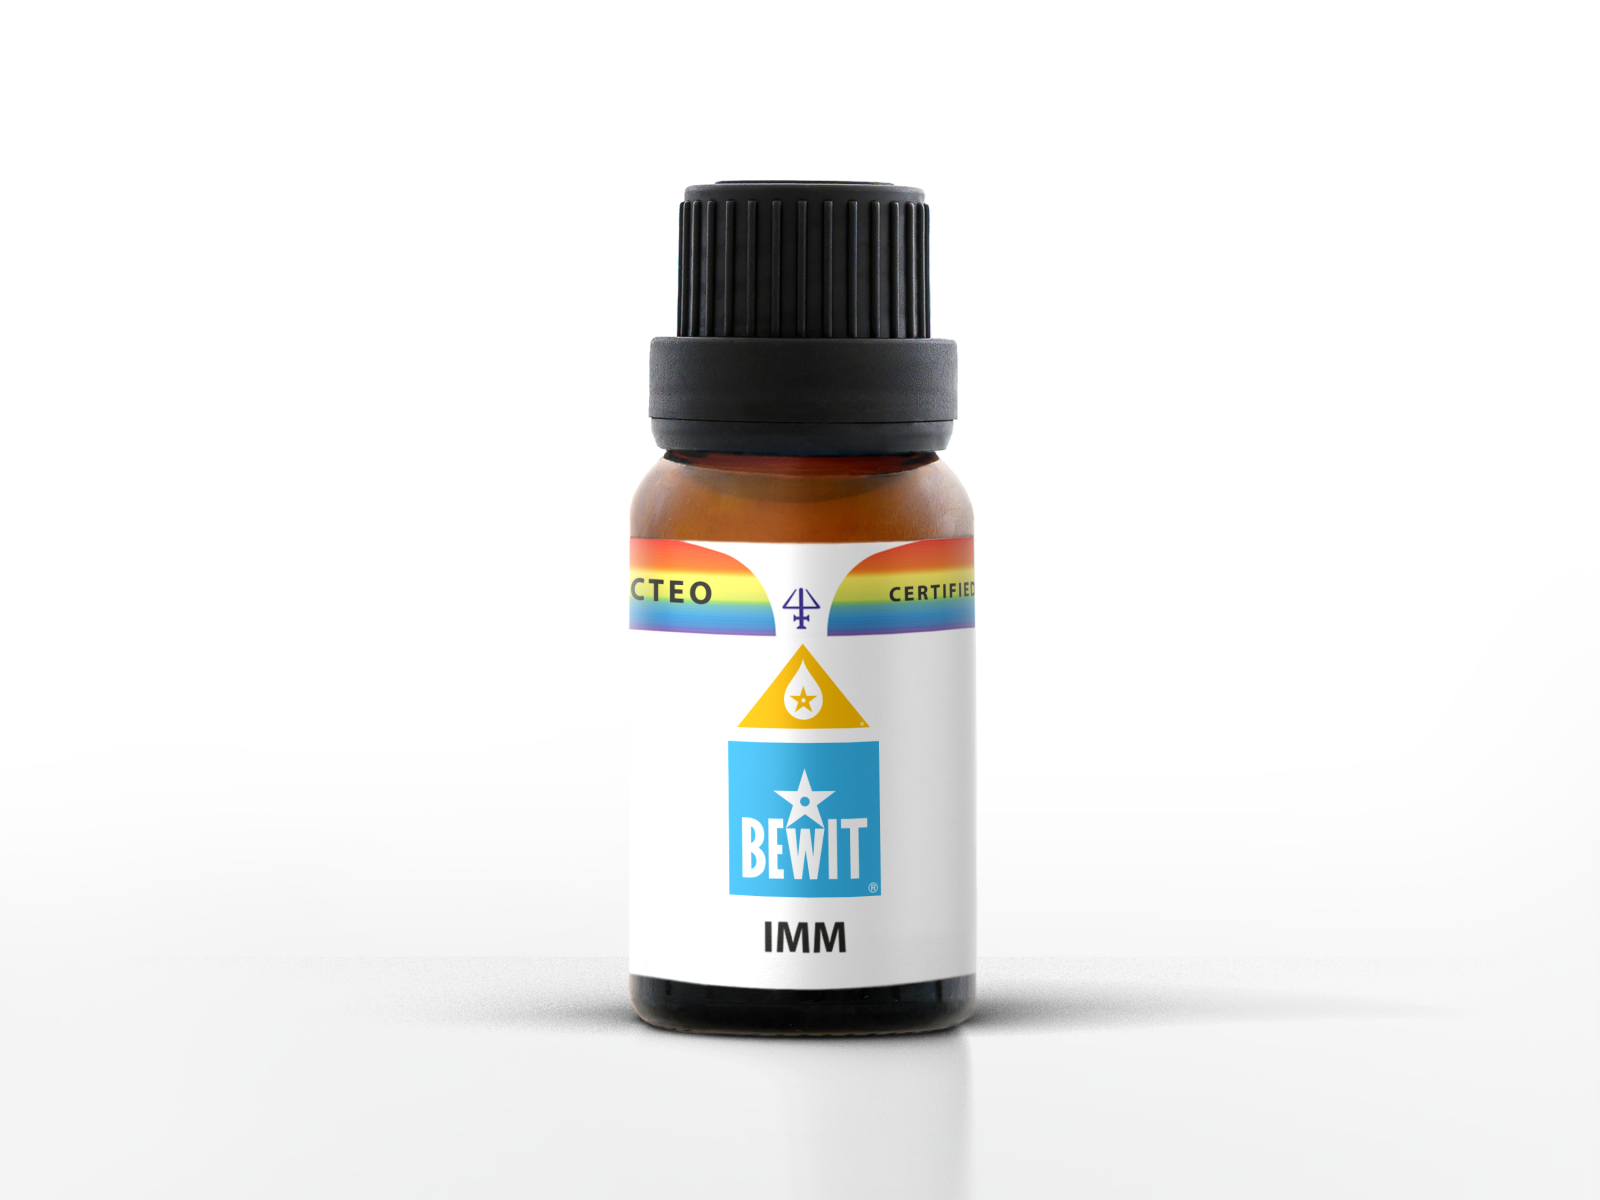 BEWIT IMM - 100% natural blend of CTEO® essential oils